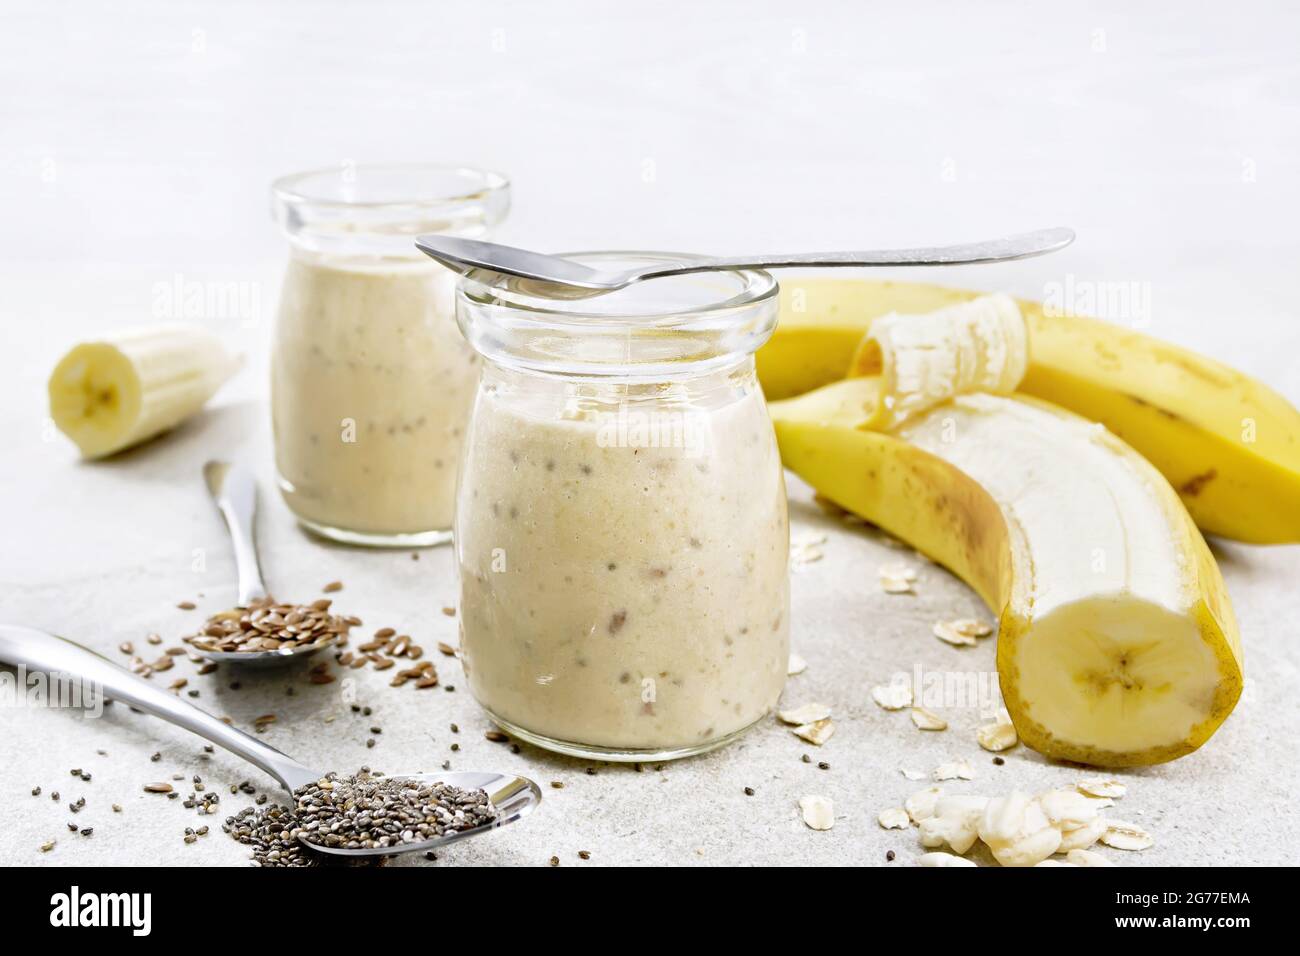 Milkshake with chia seeds, flax seeds, oatmeal, puffed rice and banana in two glass jars on a granite table background Stock Photo